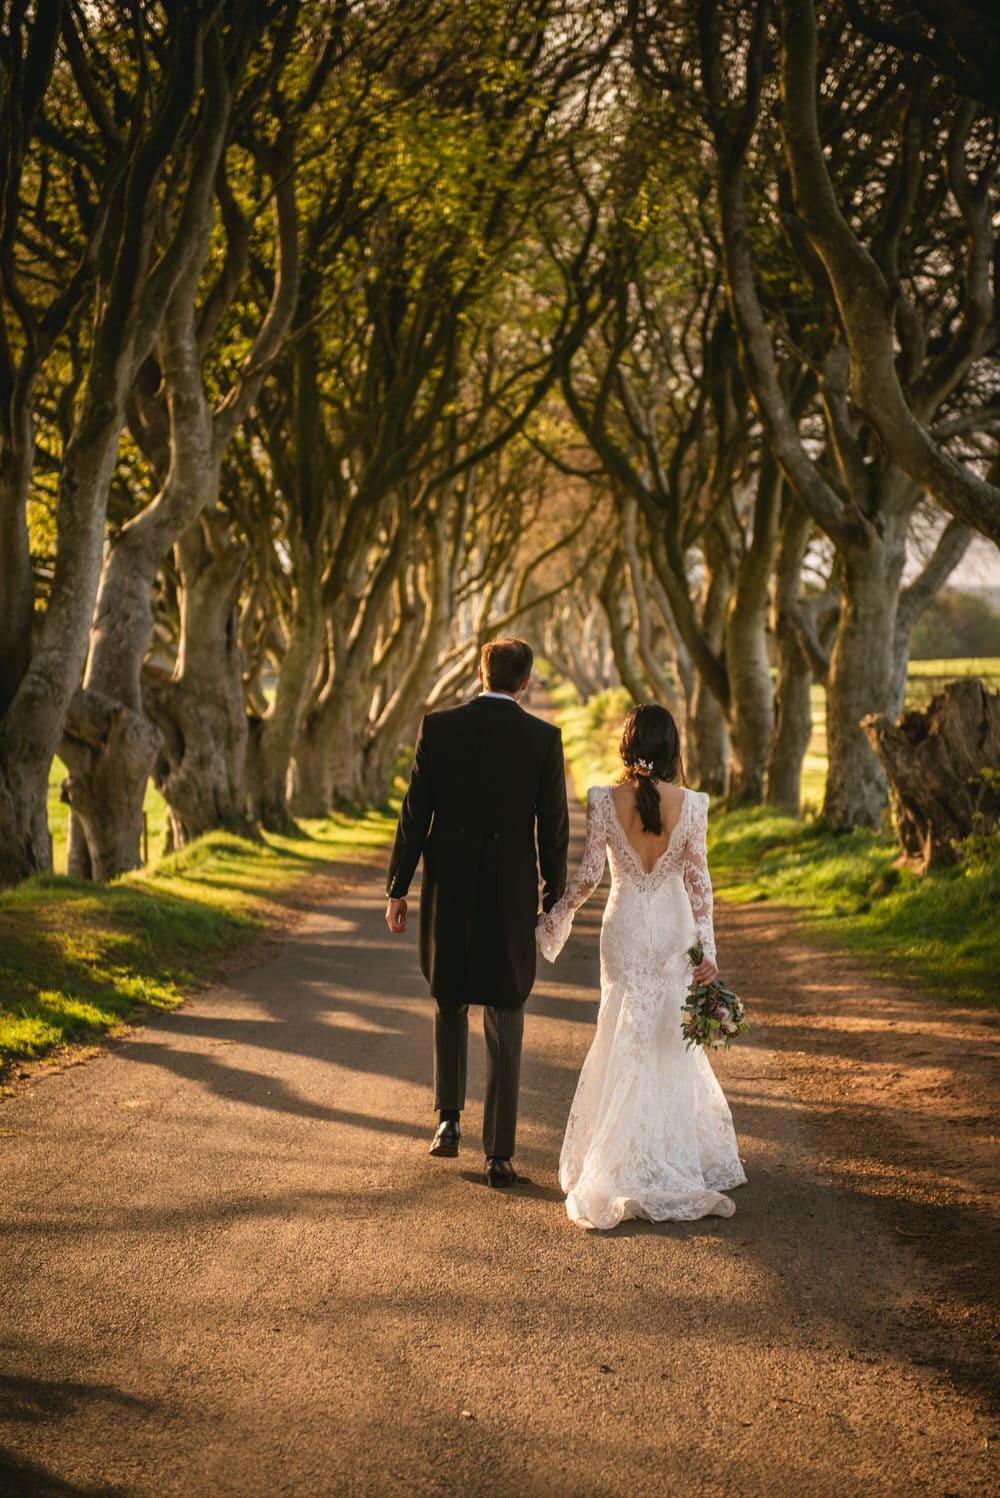 The couple sharing a private moment amidst lush foliage during their Northern Ireland elopement.